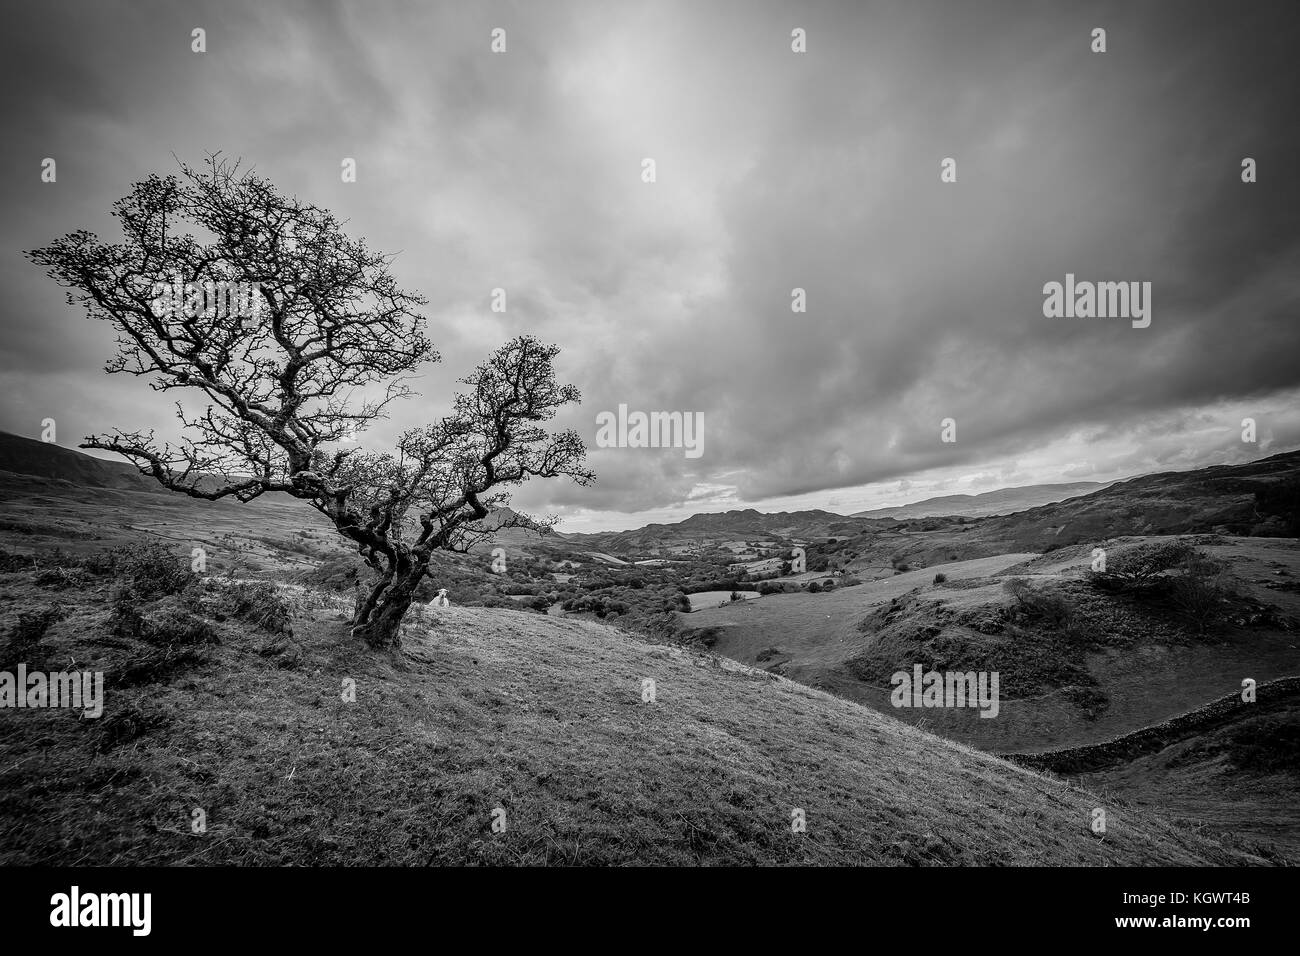 Black and white image of a single oak tree on a hill in Great Britain. Stock Photo